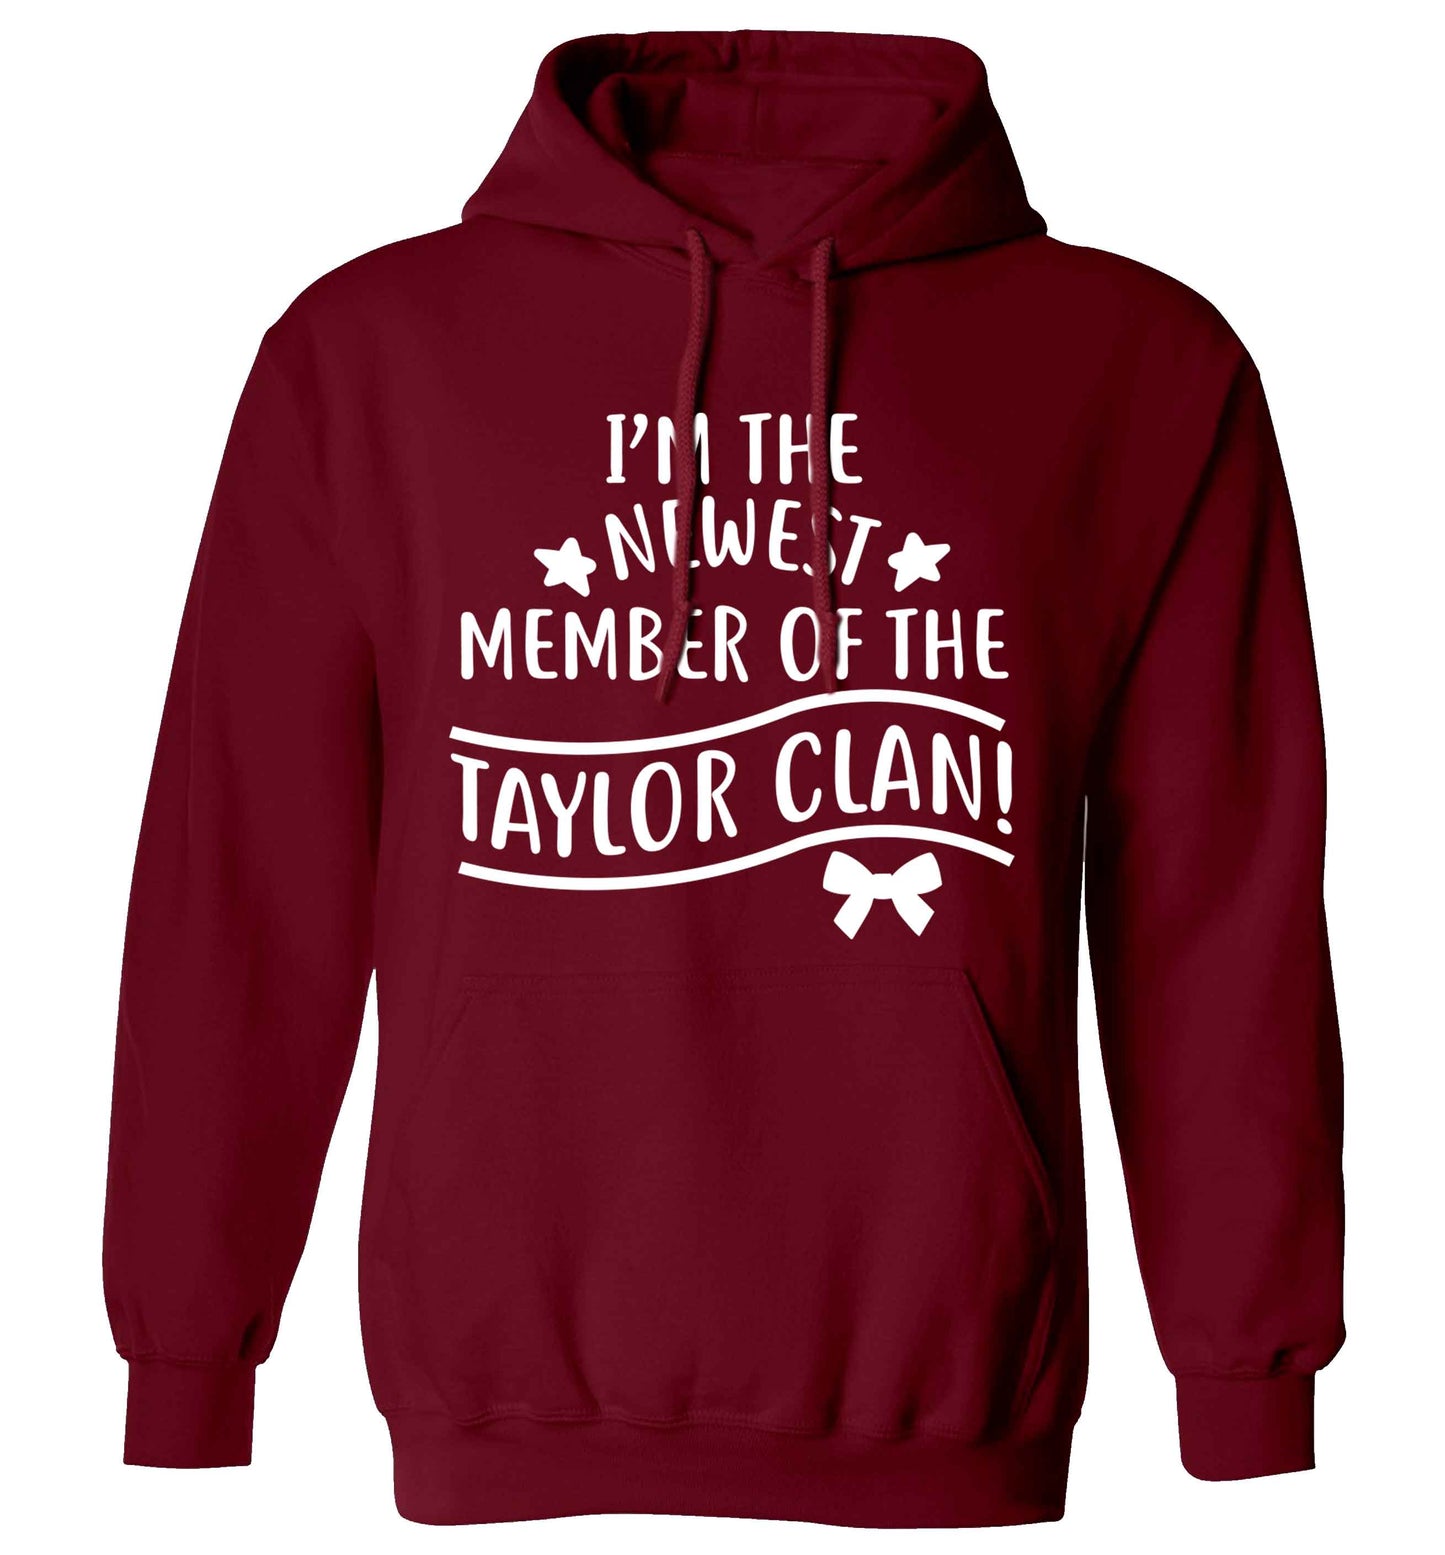 Personalised, newest member of the Taylor clan adults unisex maroon hoodie 2XL